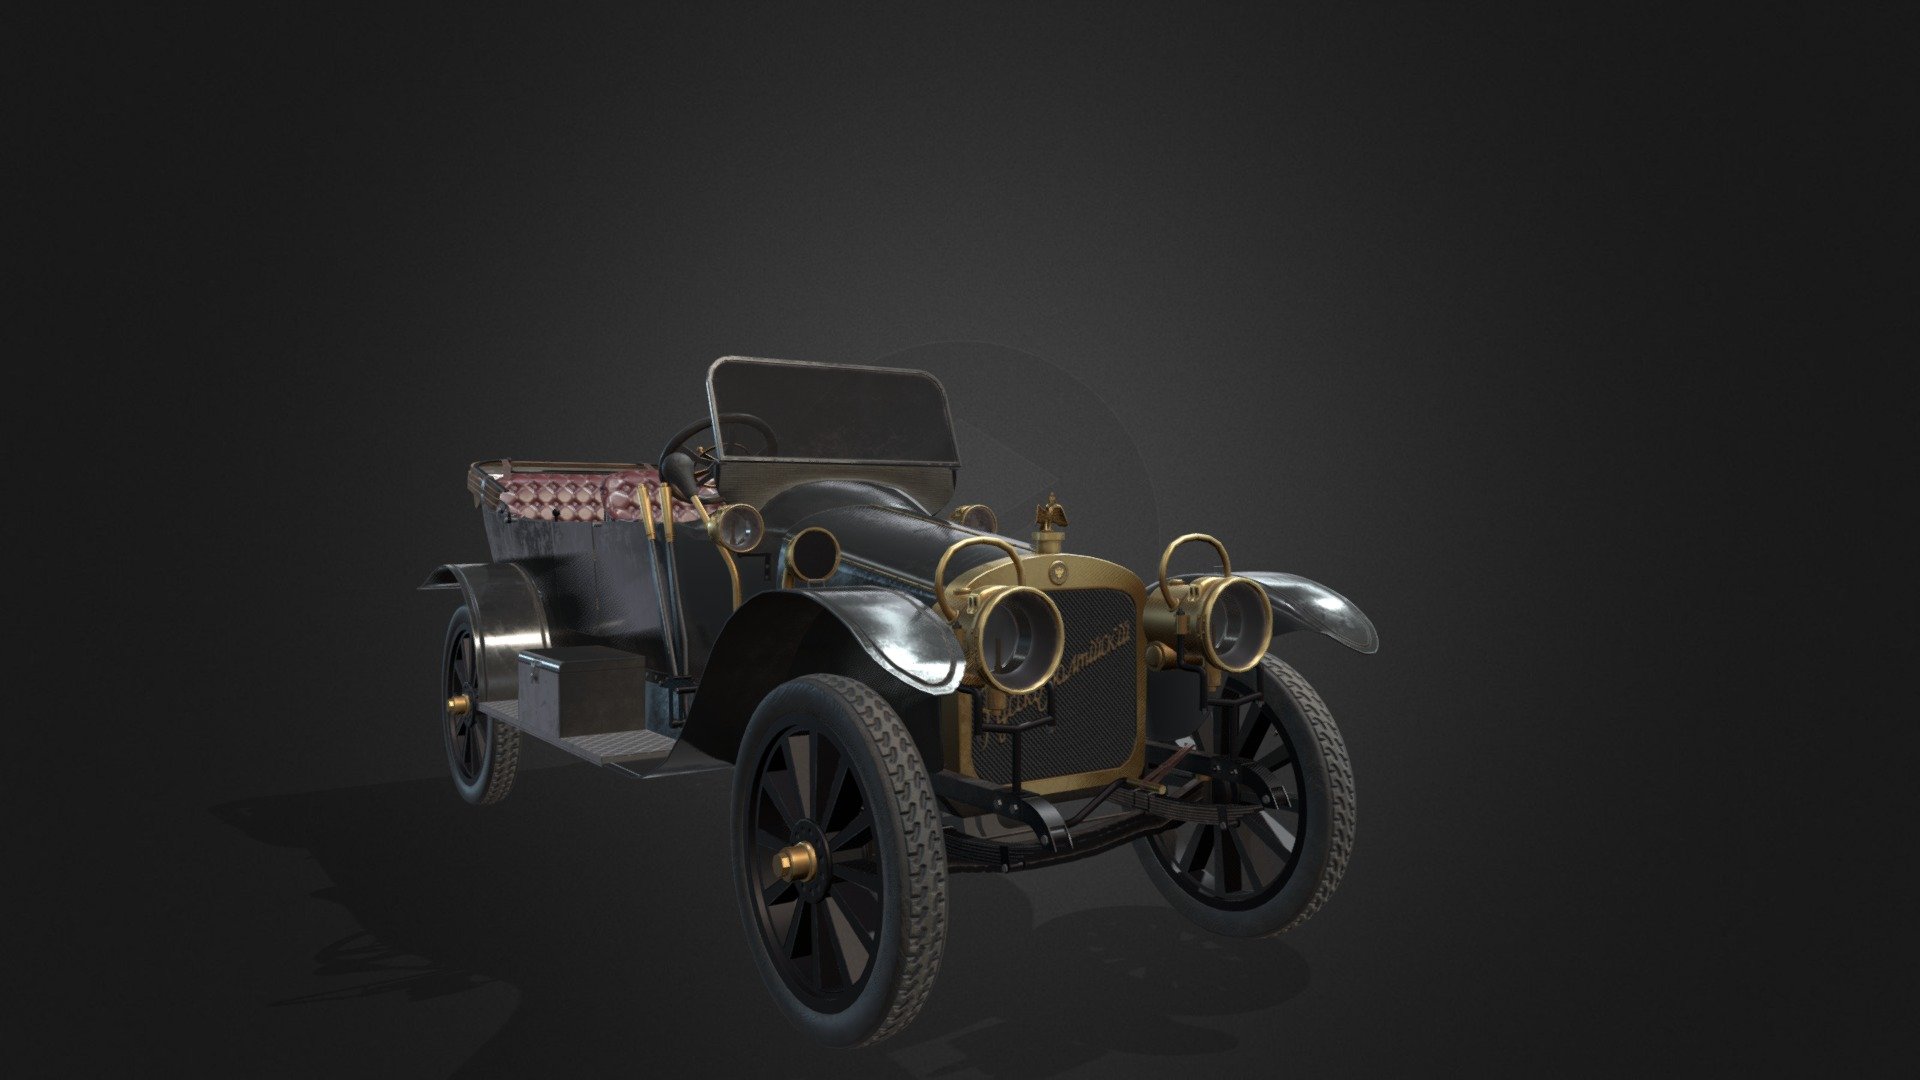 Low/midpoly 3d model of the Russo-Balt (Russo-Baltique) model K vehicle, one of the first cars produced in Russia at the Russo-Baltic Wagon Factory located in Riga (special automobile department was created in 1909). Simplier and cheaper than its &ldquo;big brother